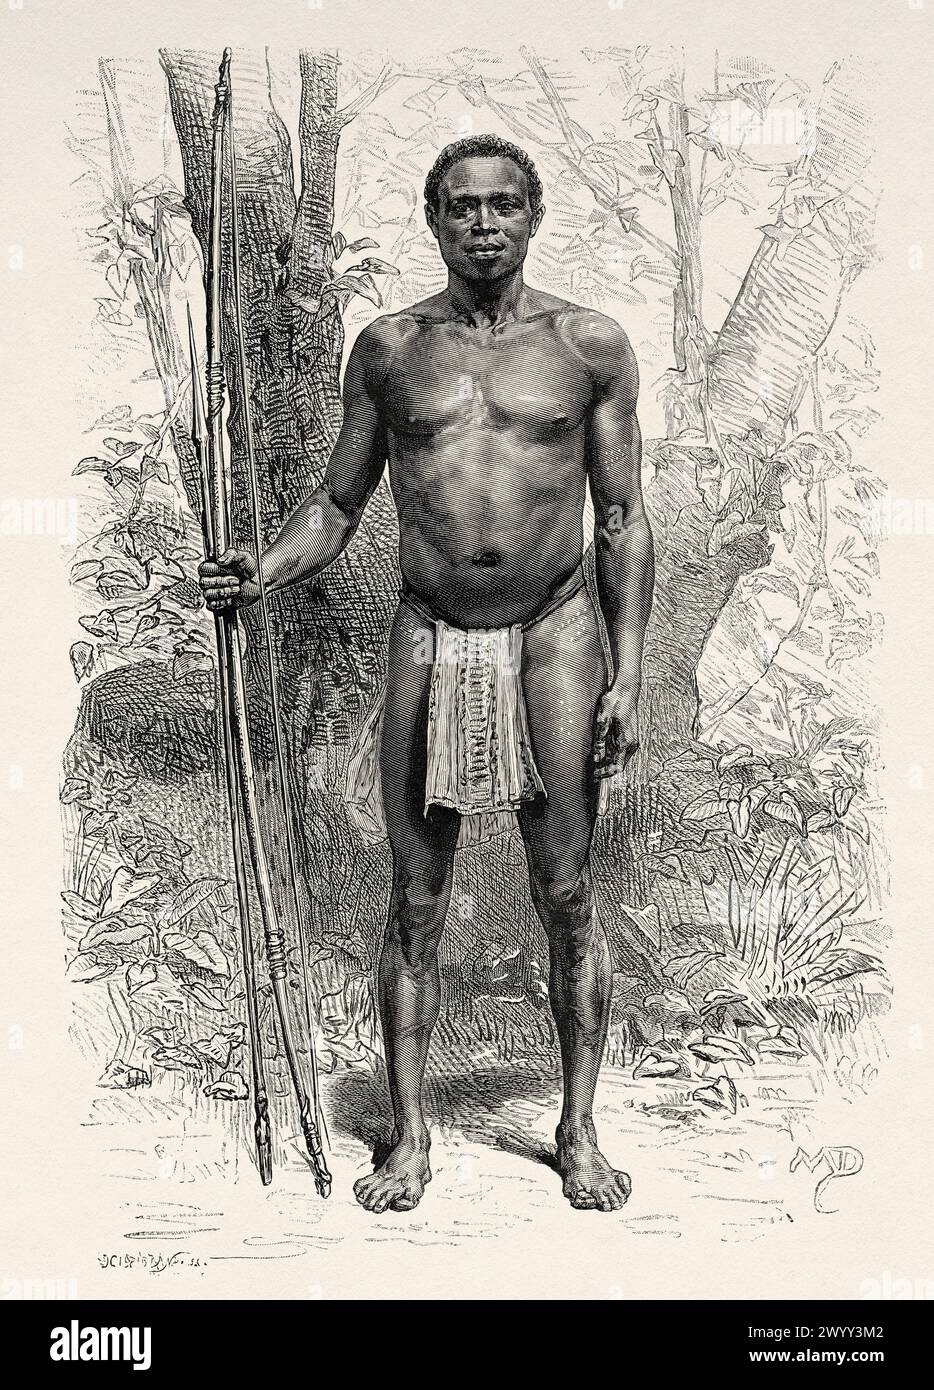 Apatou Indian, French Guiana, South America. Drawing by D. Maillart. From Cayenne to the Andes (1878-1879) by Jules Crevaux (1847 - 1882) Le Tour du Monde 1880 Stock Photo